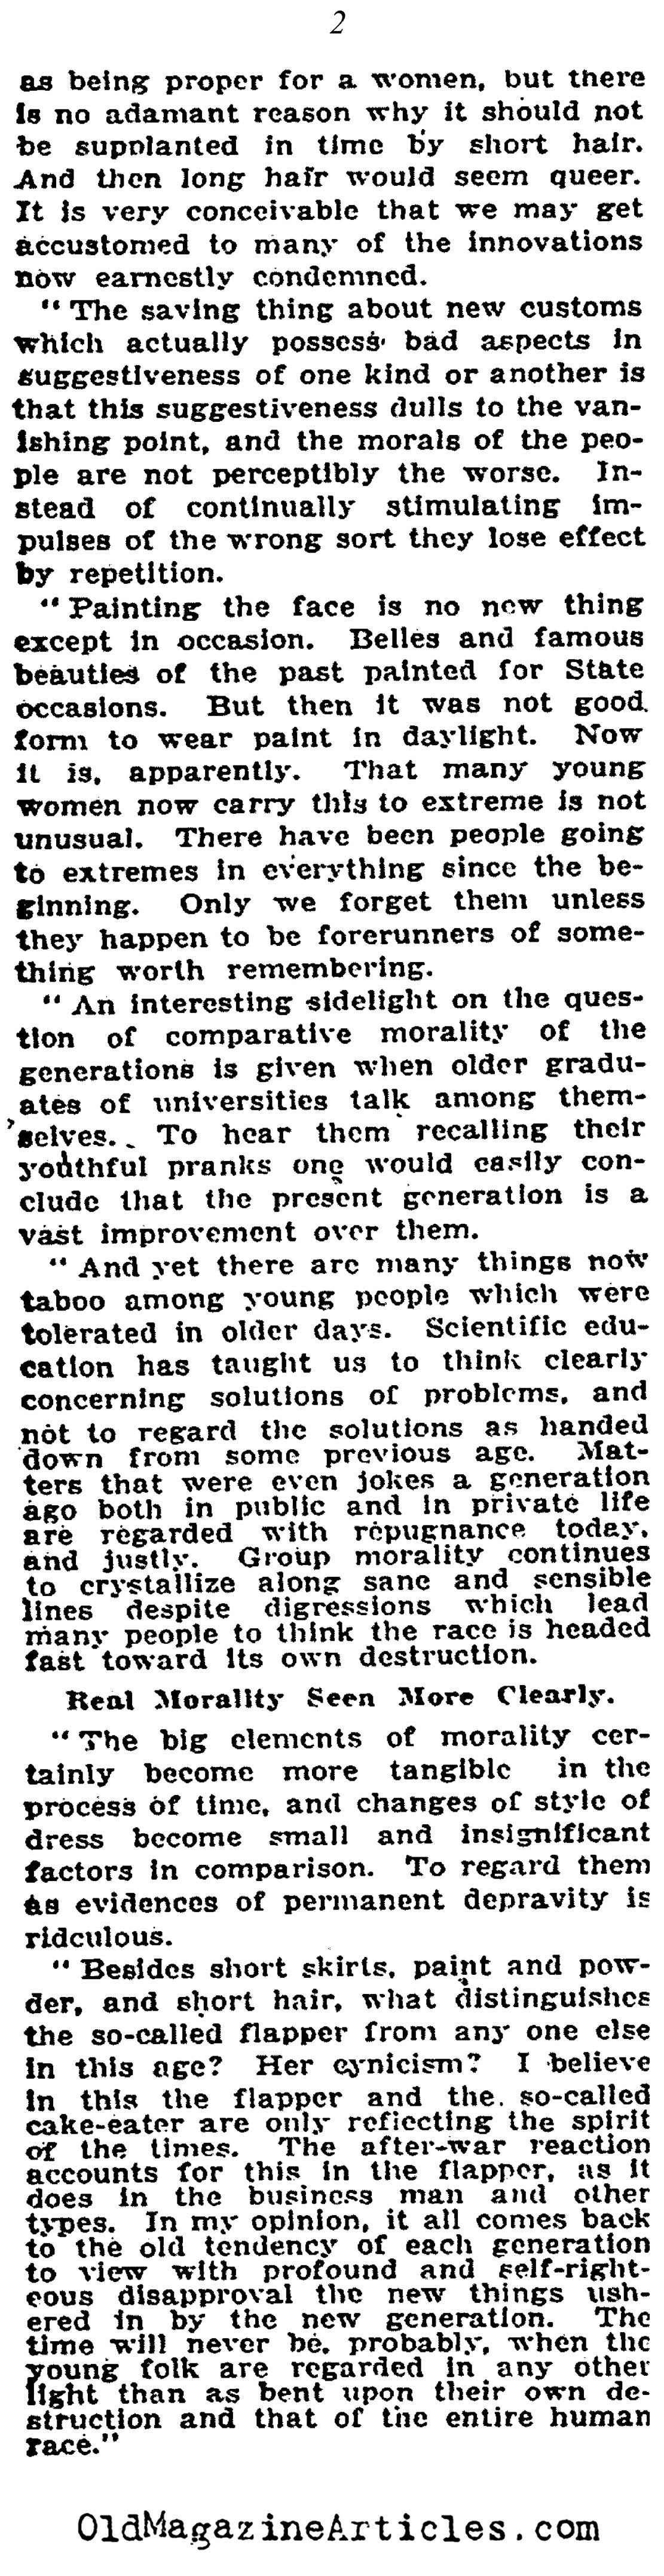 Flappers Were Nothing New  (NY Times, 1922)